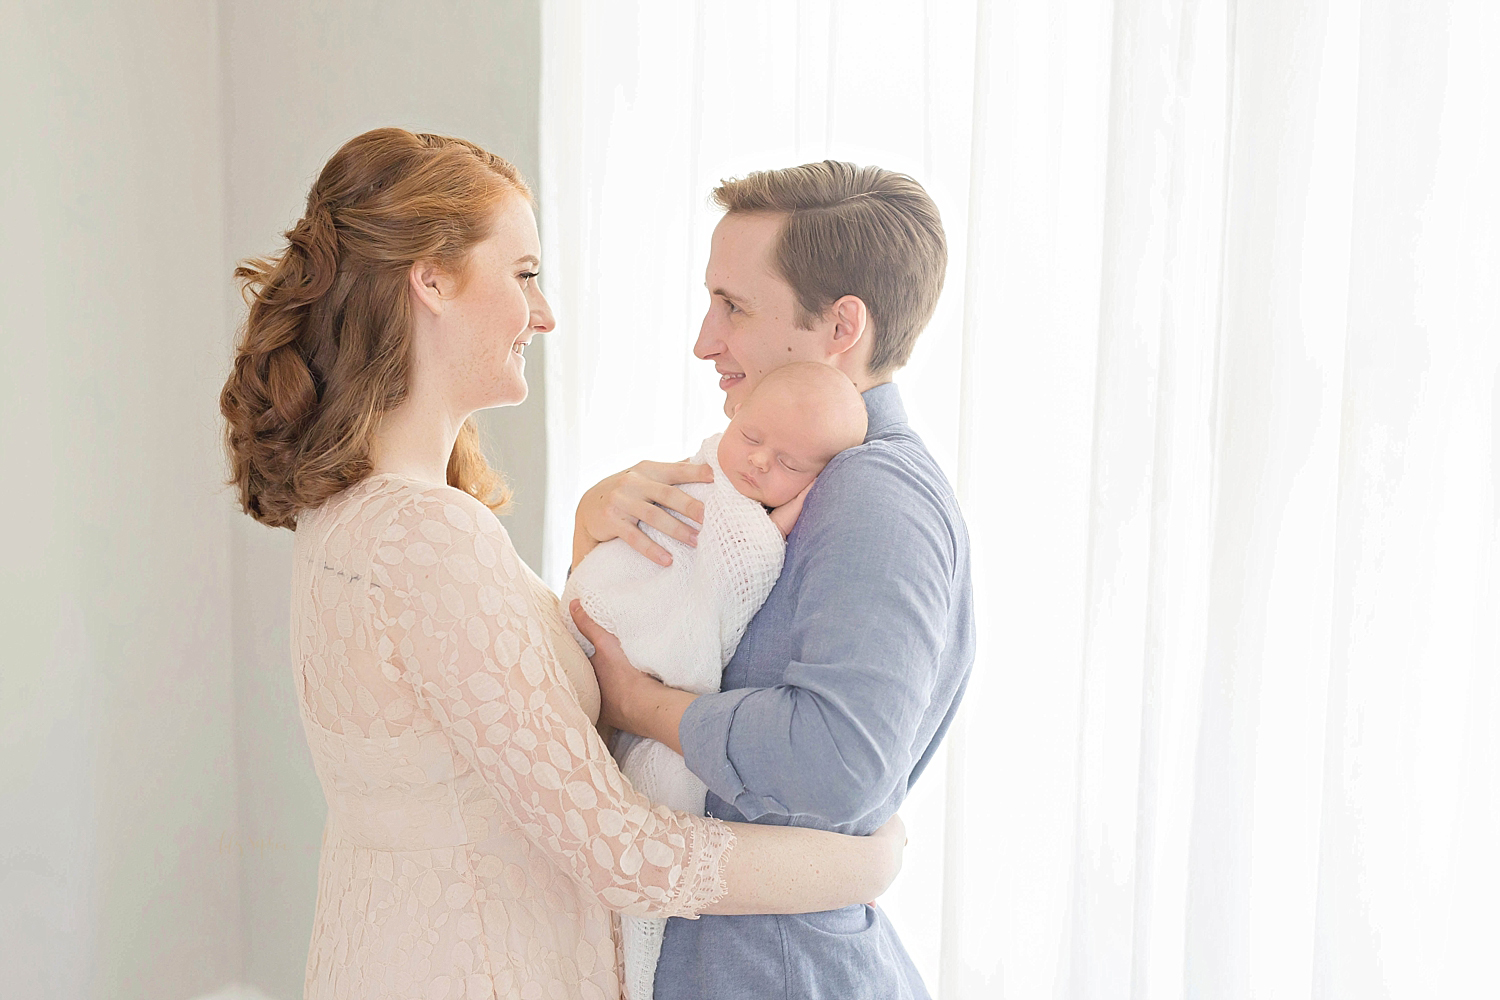  Red-haired woman wearing a blush pink lace dress stands facing her husband who is wearing a blue chambray buttoned-down shirt.  The husband holds his sleeping infant son in his arms.  The wife is holding her husband around his waist and the two of t